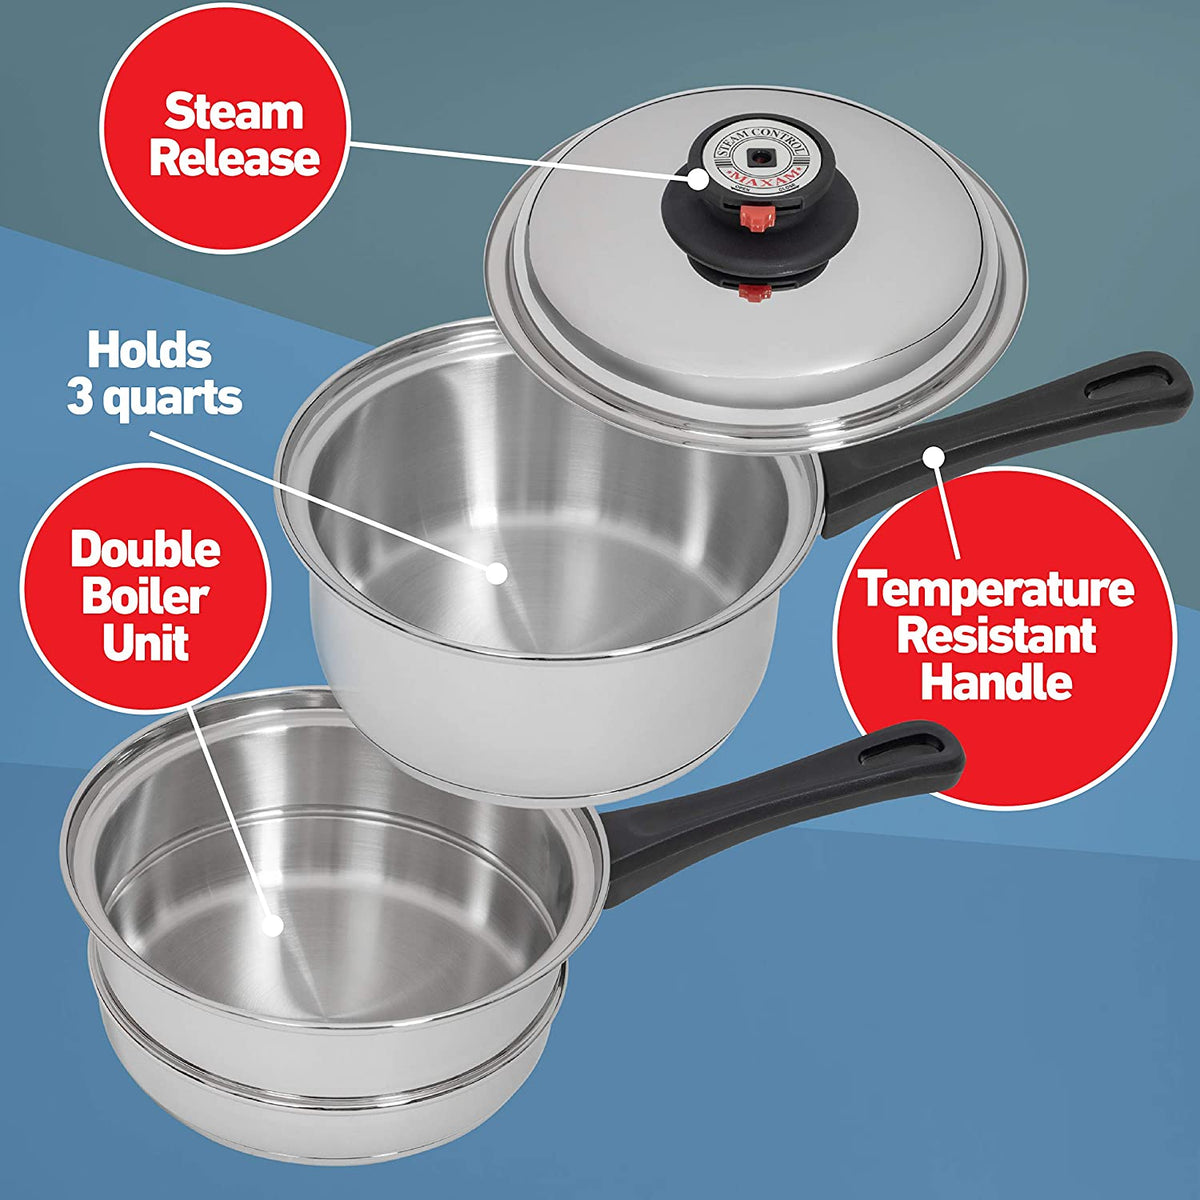 Maxam 9-Element Surgical 17-Piece Cookware Set, Stainless Steel